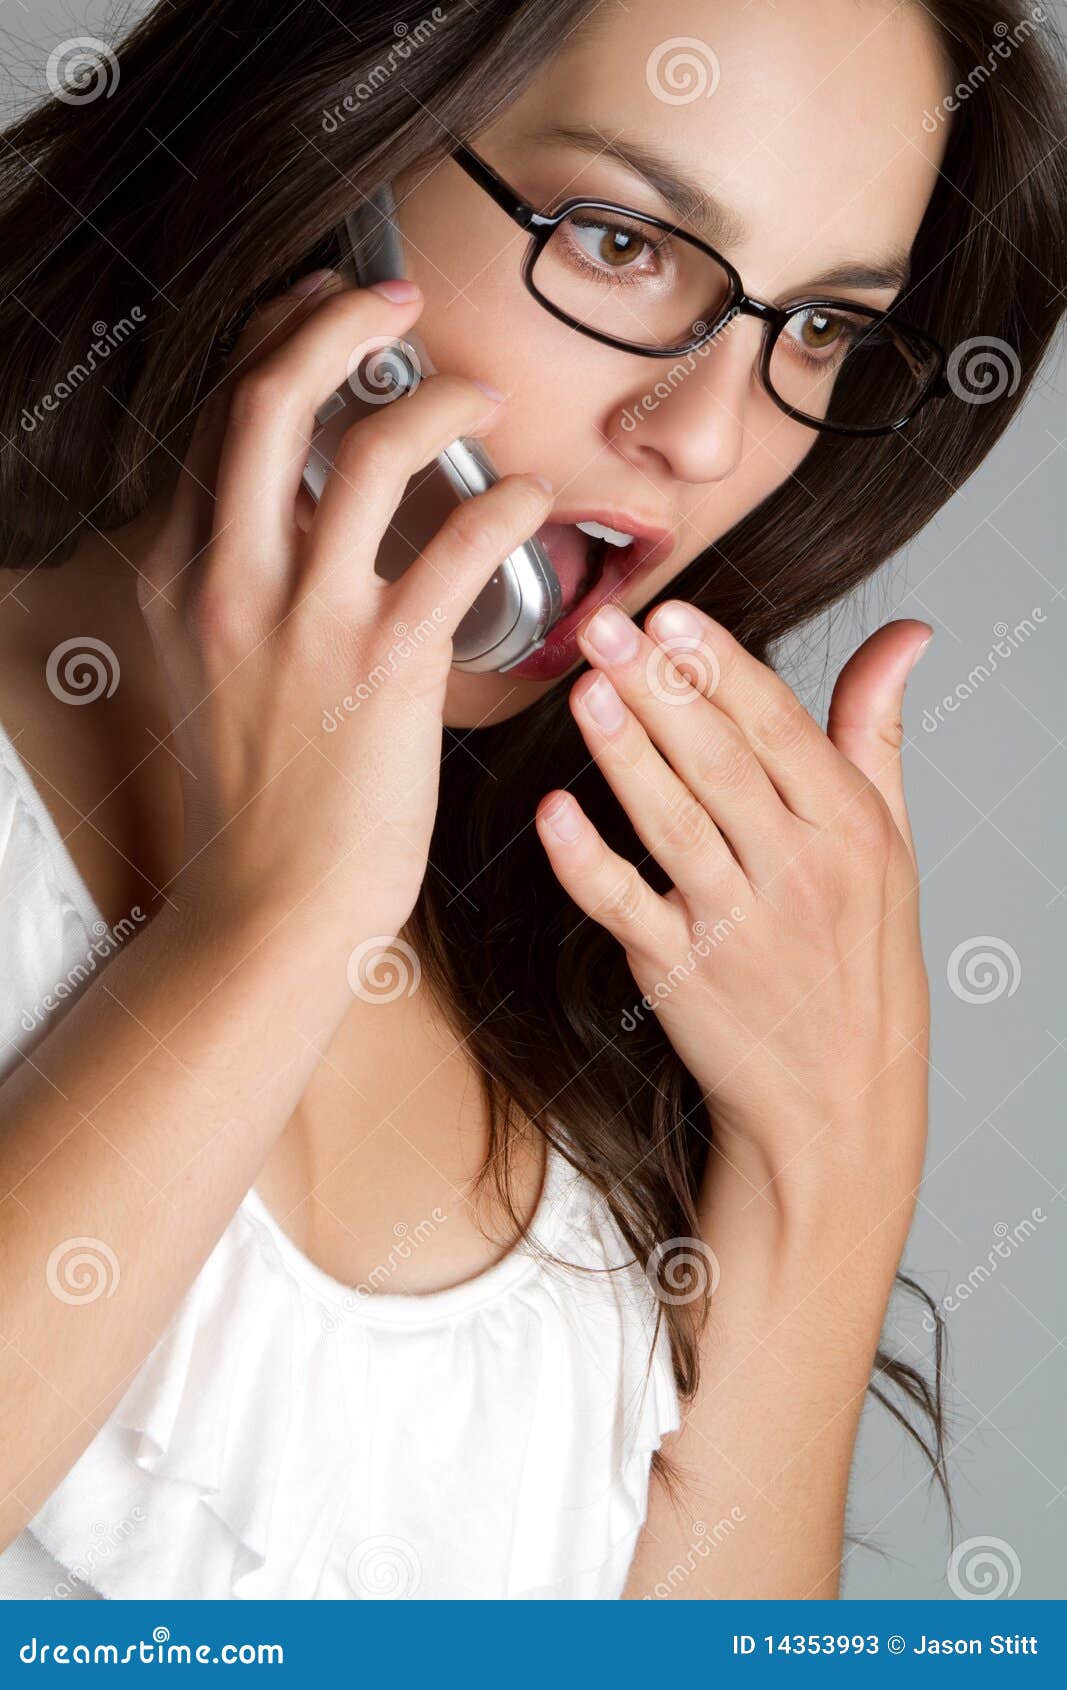 Shocked Phone Woman stock image. Image of surprised, businessperson